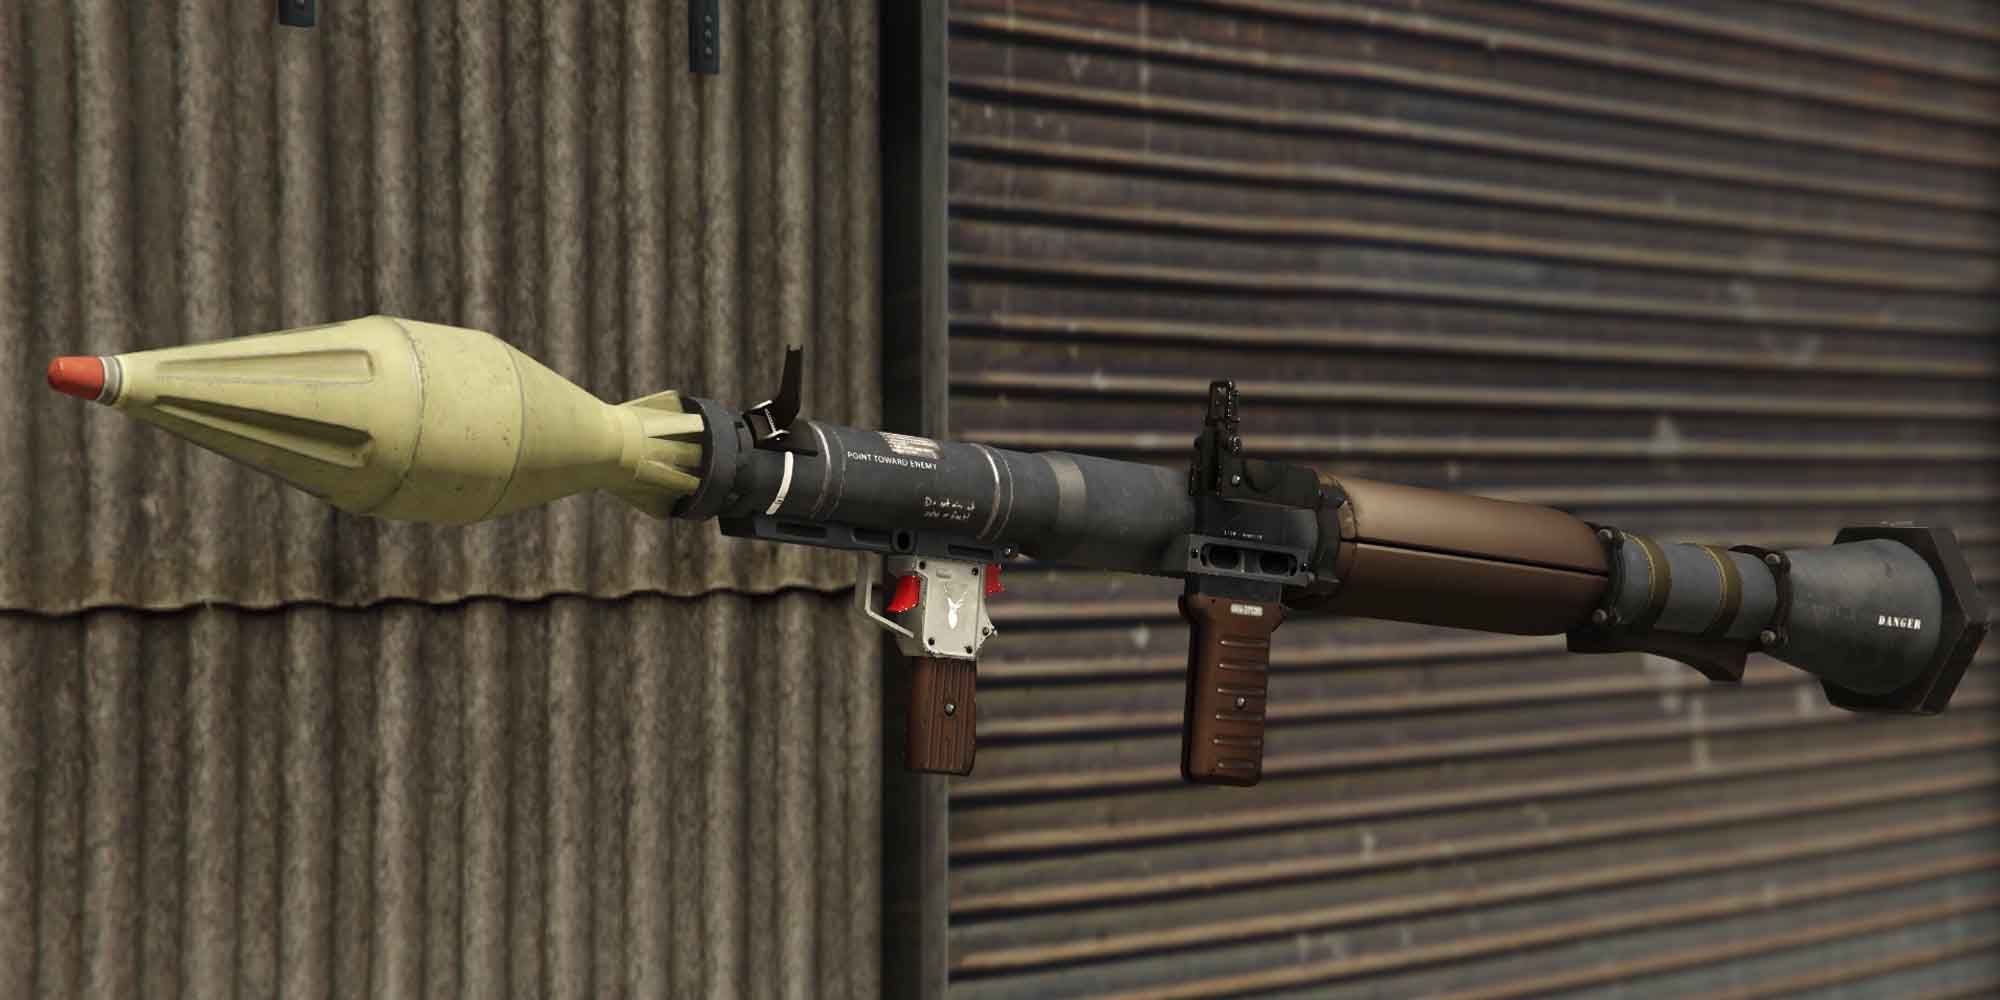 The Rocket Launcher, or RPG, in GTA 5